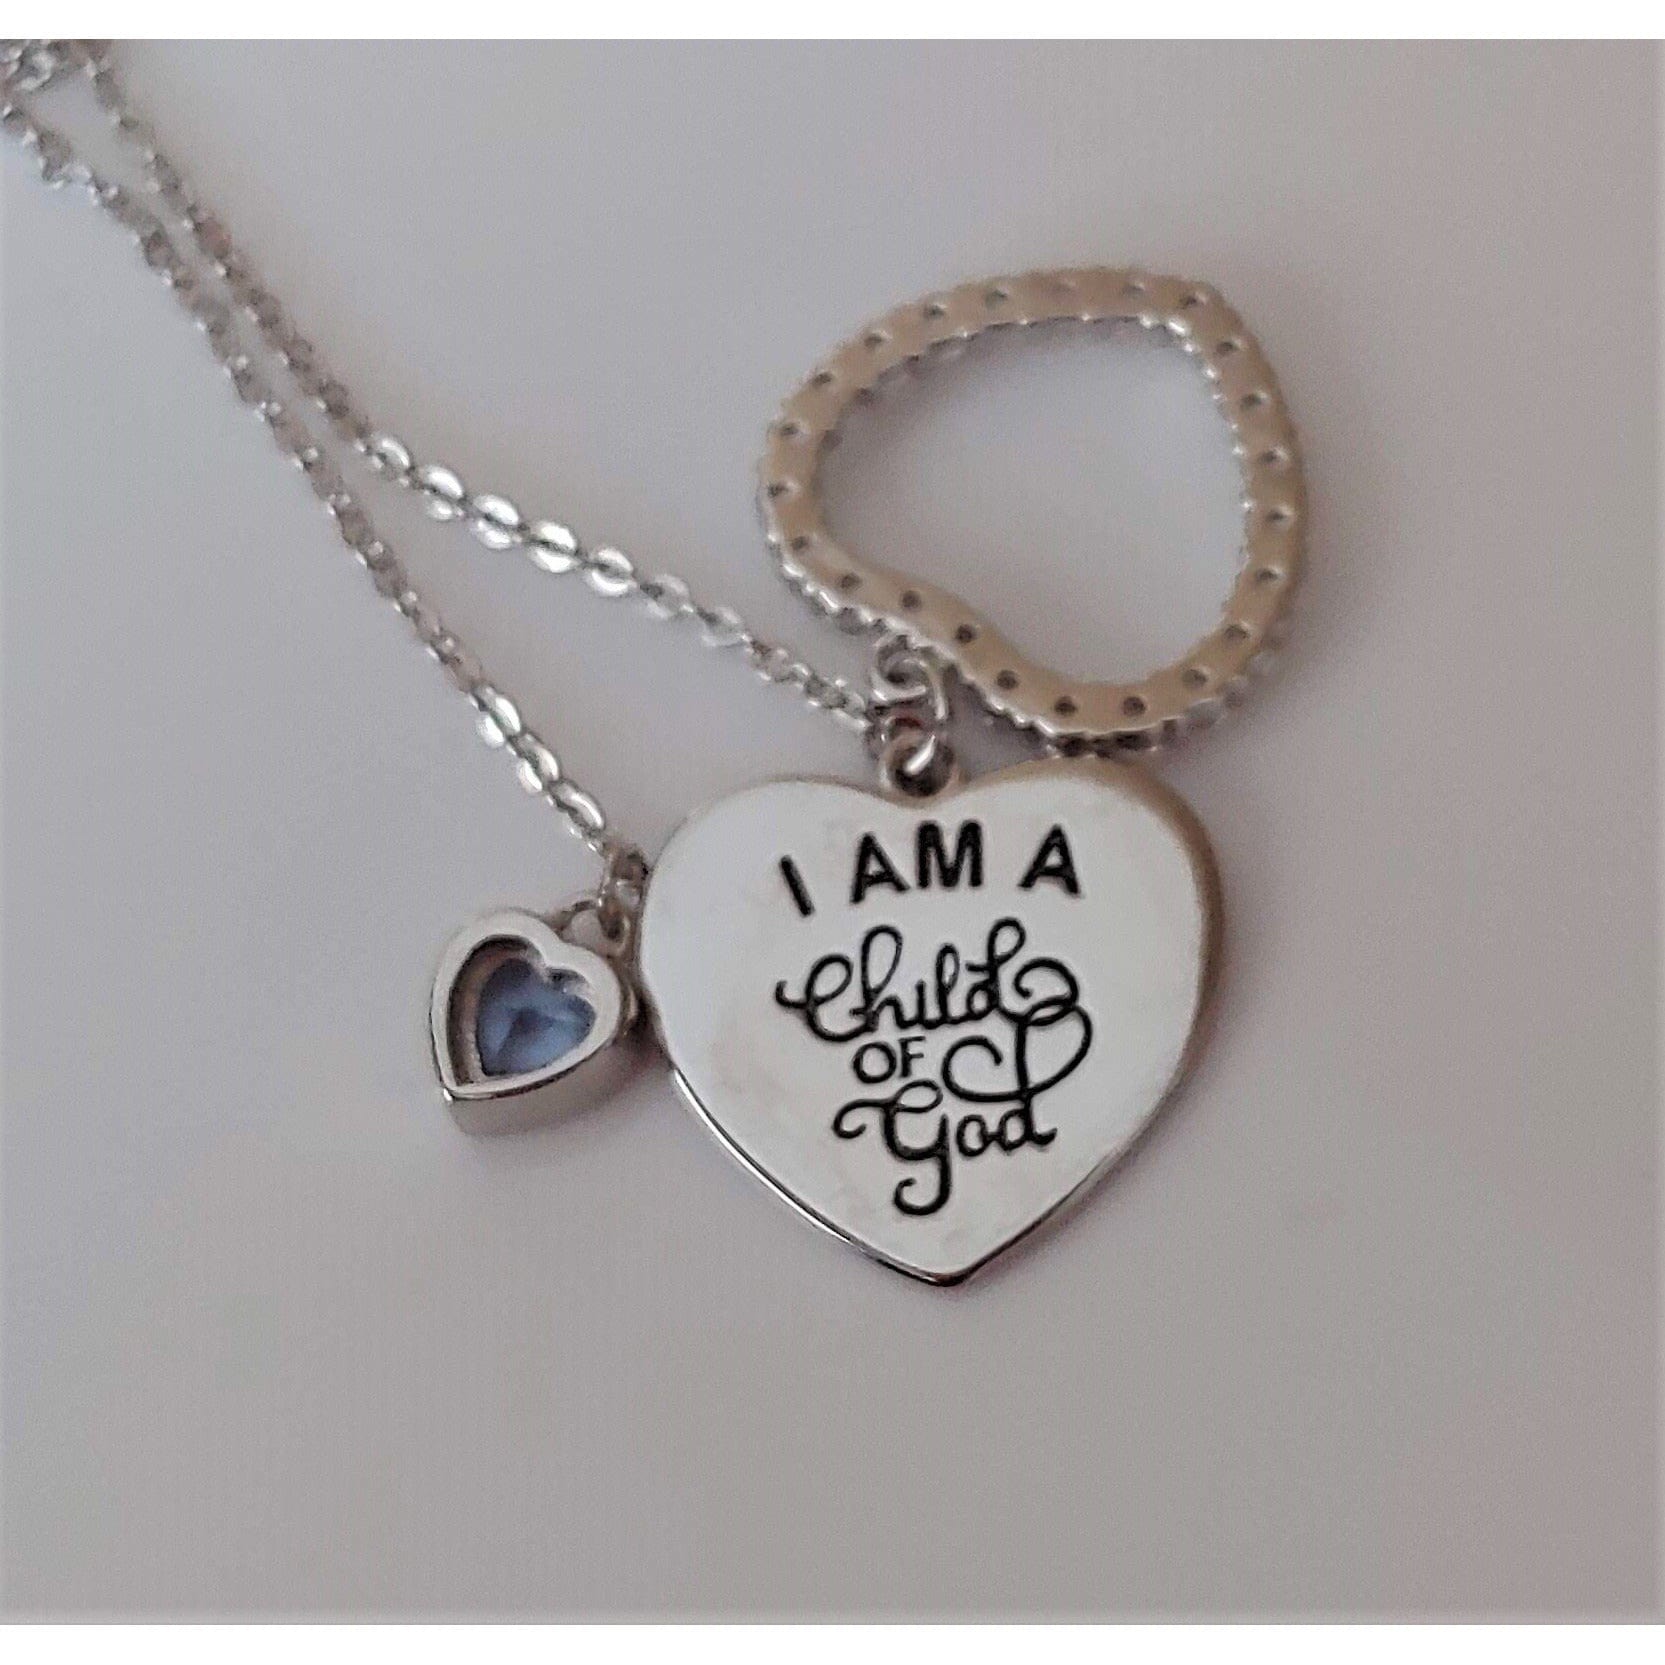 I AM A CHILD OF GOD Sterling Silver Inspirational Necklace! Only $59.95! - The Pink Pigs, A Compassionate Boutique